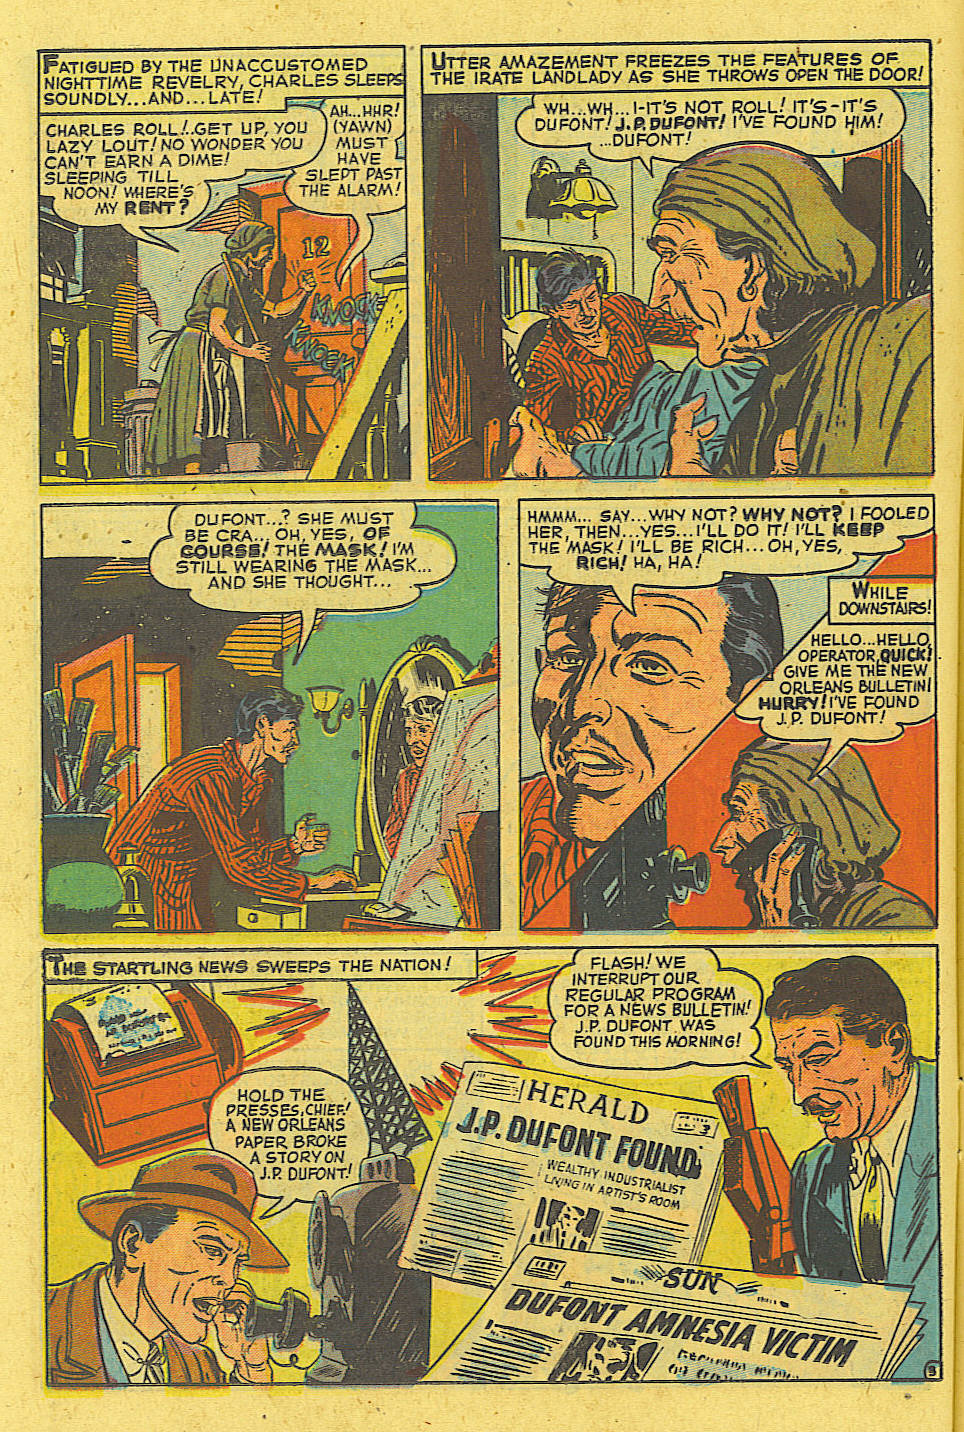 Marvel Tales (1949) 103 Page 14